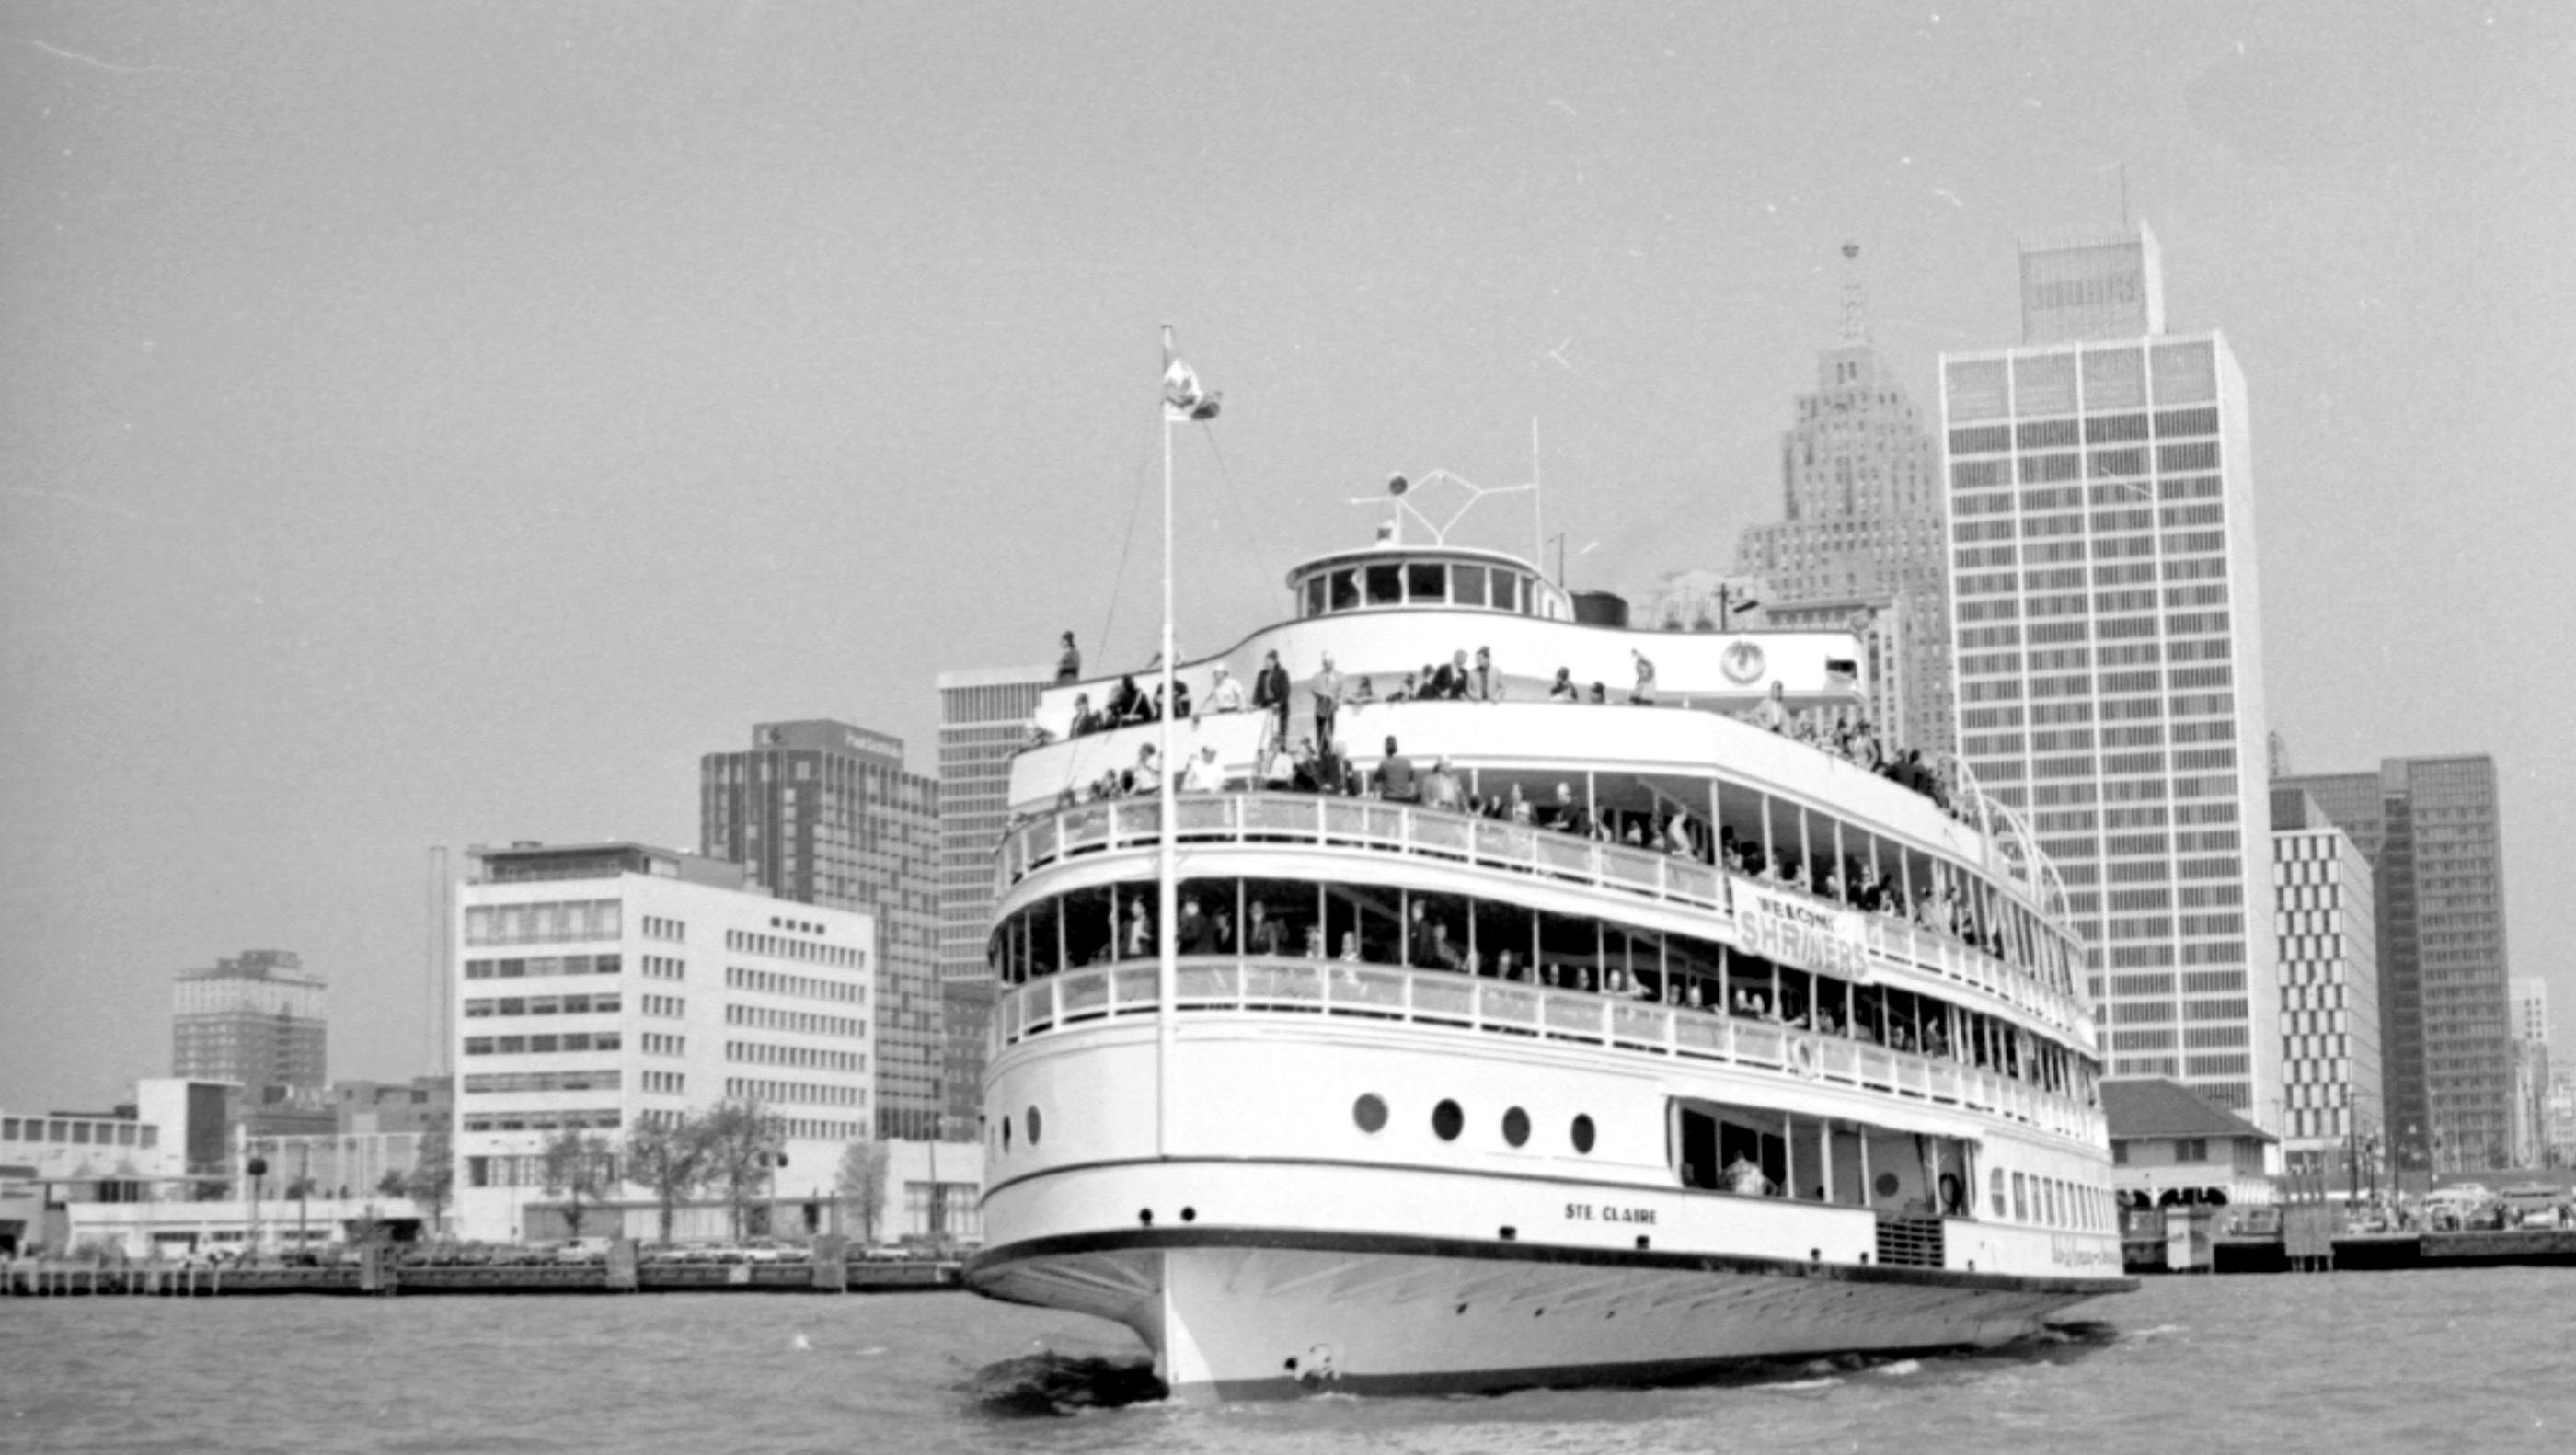 The Boblo steamship Ste. Claire cruises the Detroit River in May 1967.